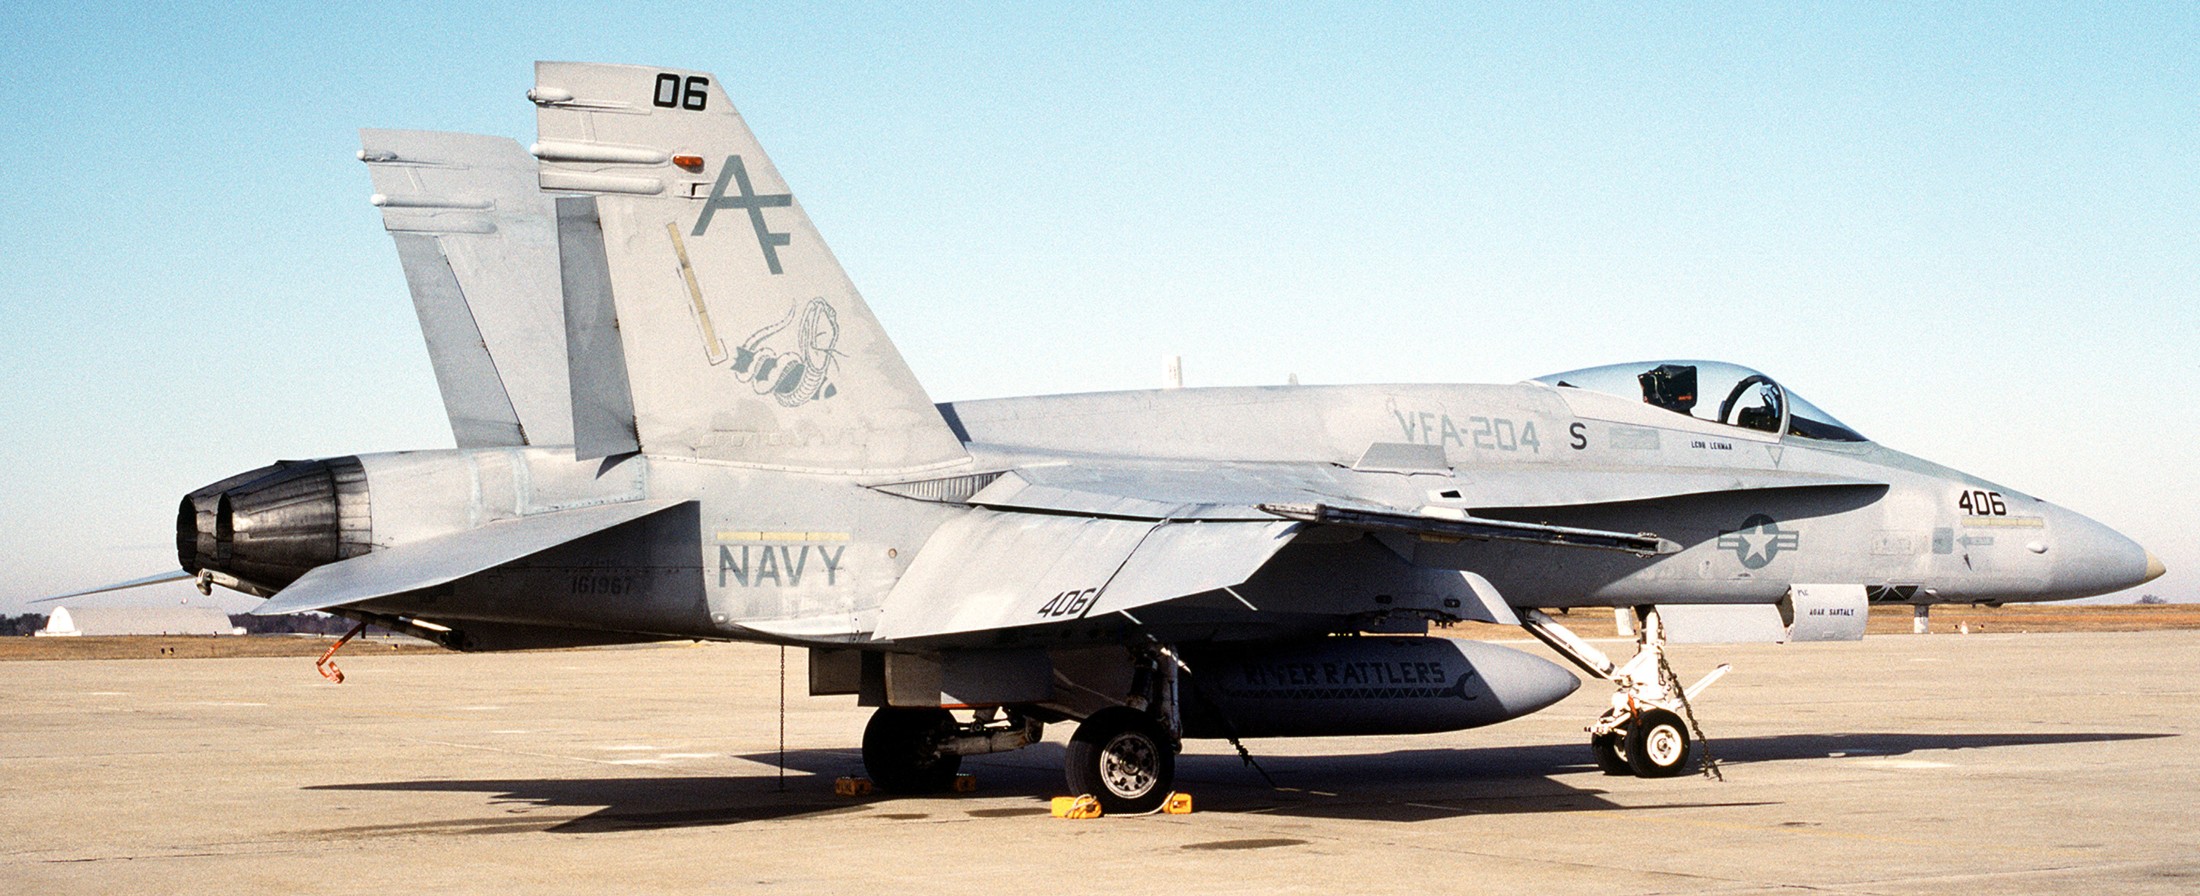 vfa-204 river rattlers f/a-18a+ hornet strike fighter squadron us navy reserve 17